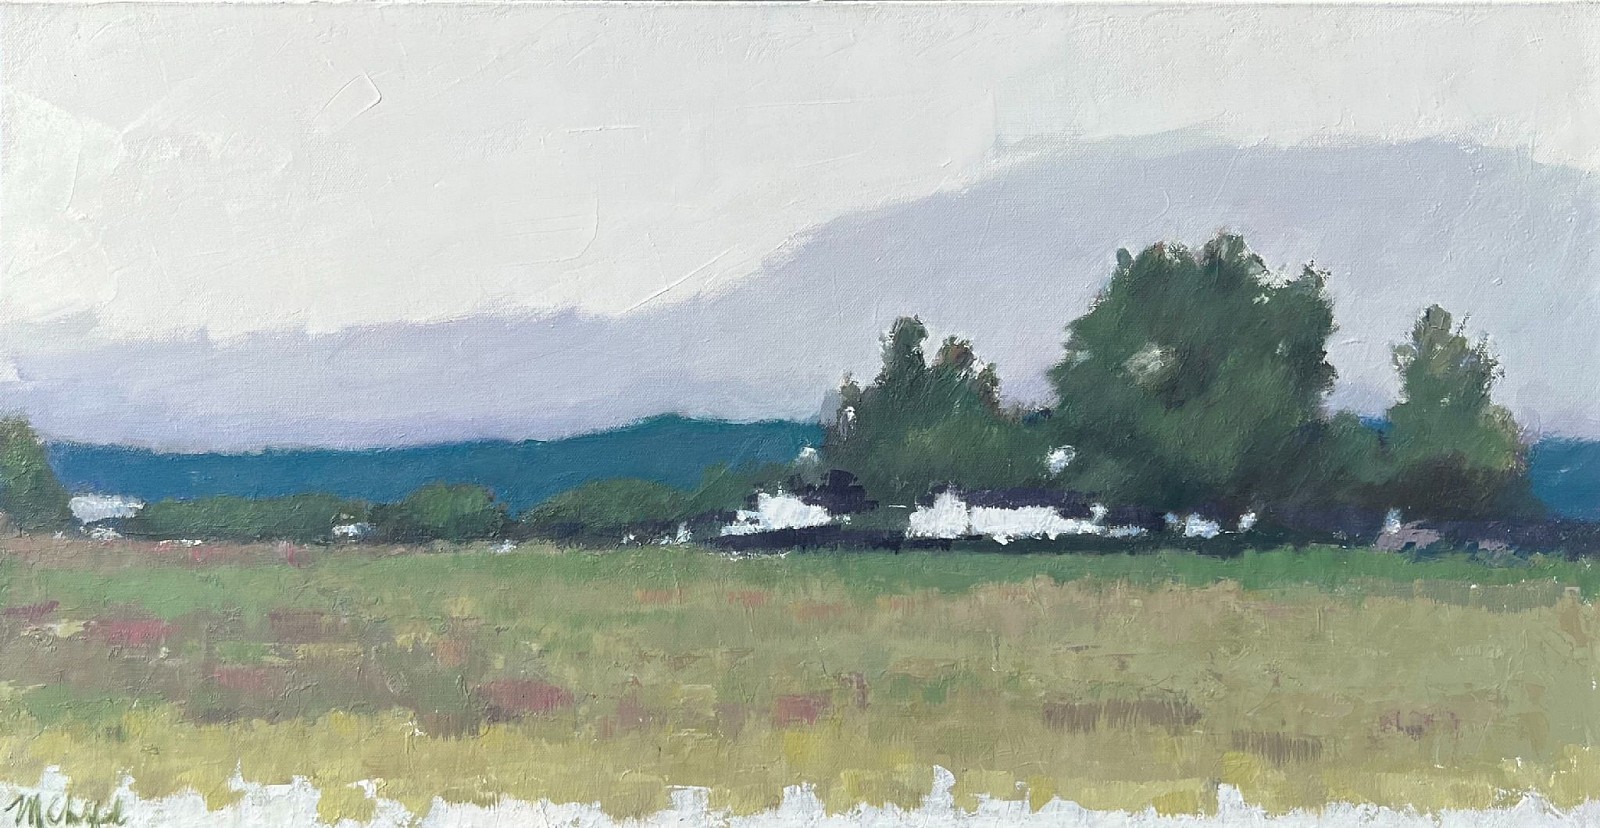 Maureen Chatfield, Cold Brook, 2022
oil on canvas, 15 x 30 in. (38.1 x 76.2 cm)
MC221212